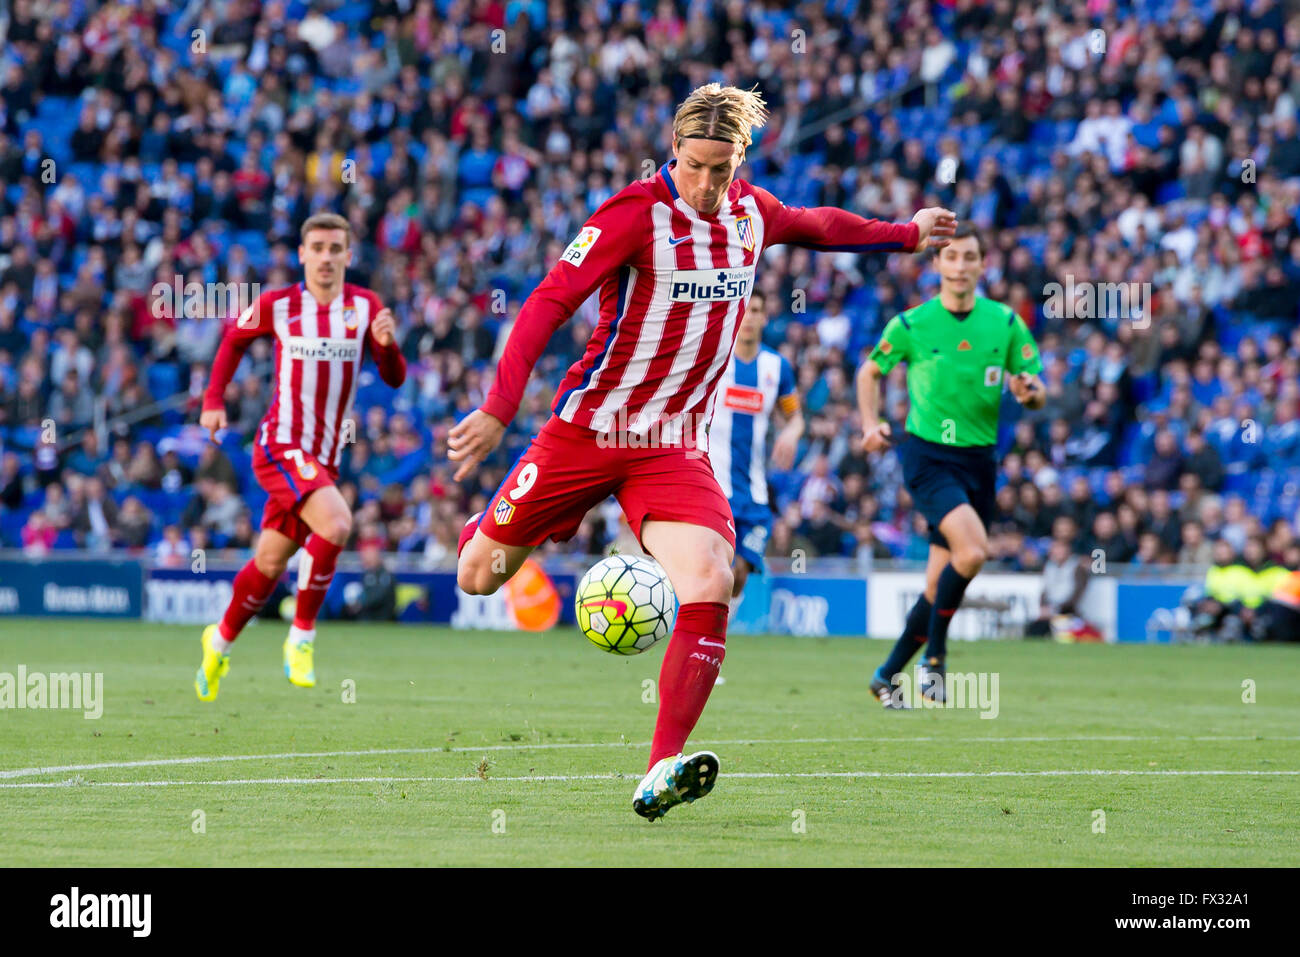 Barcelona, Spain. 9th April, 2016. Fernando Torres plays at the La Liga match between RCD Espanyol and Atletico de Madrid at the Powerade Stadium on April 9, 2016 in Barcelonal, Spain. Credit:  Christian Bertrand/Alamy Live News Stock Photo